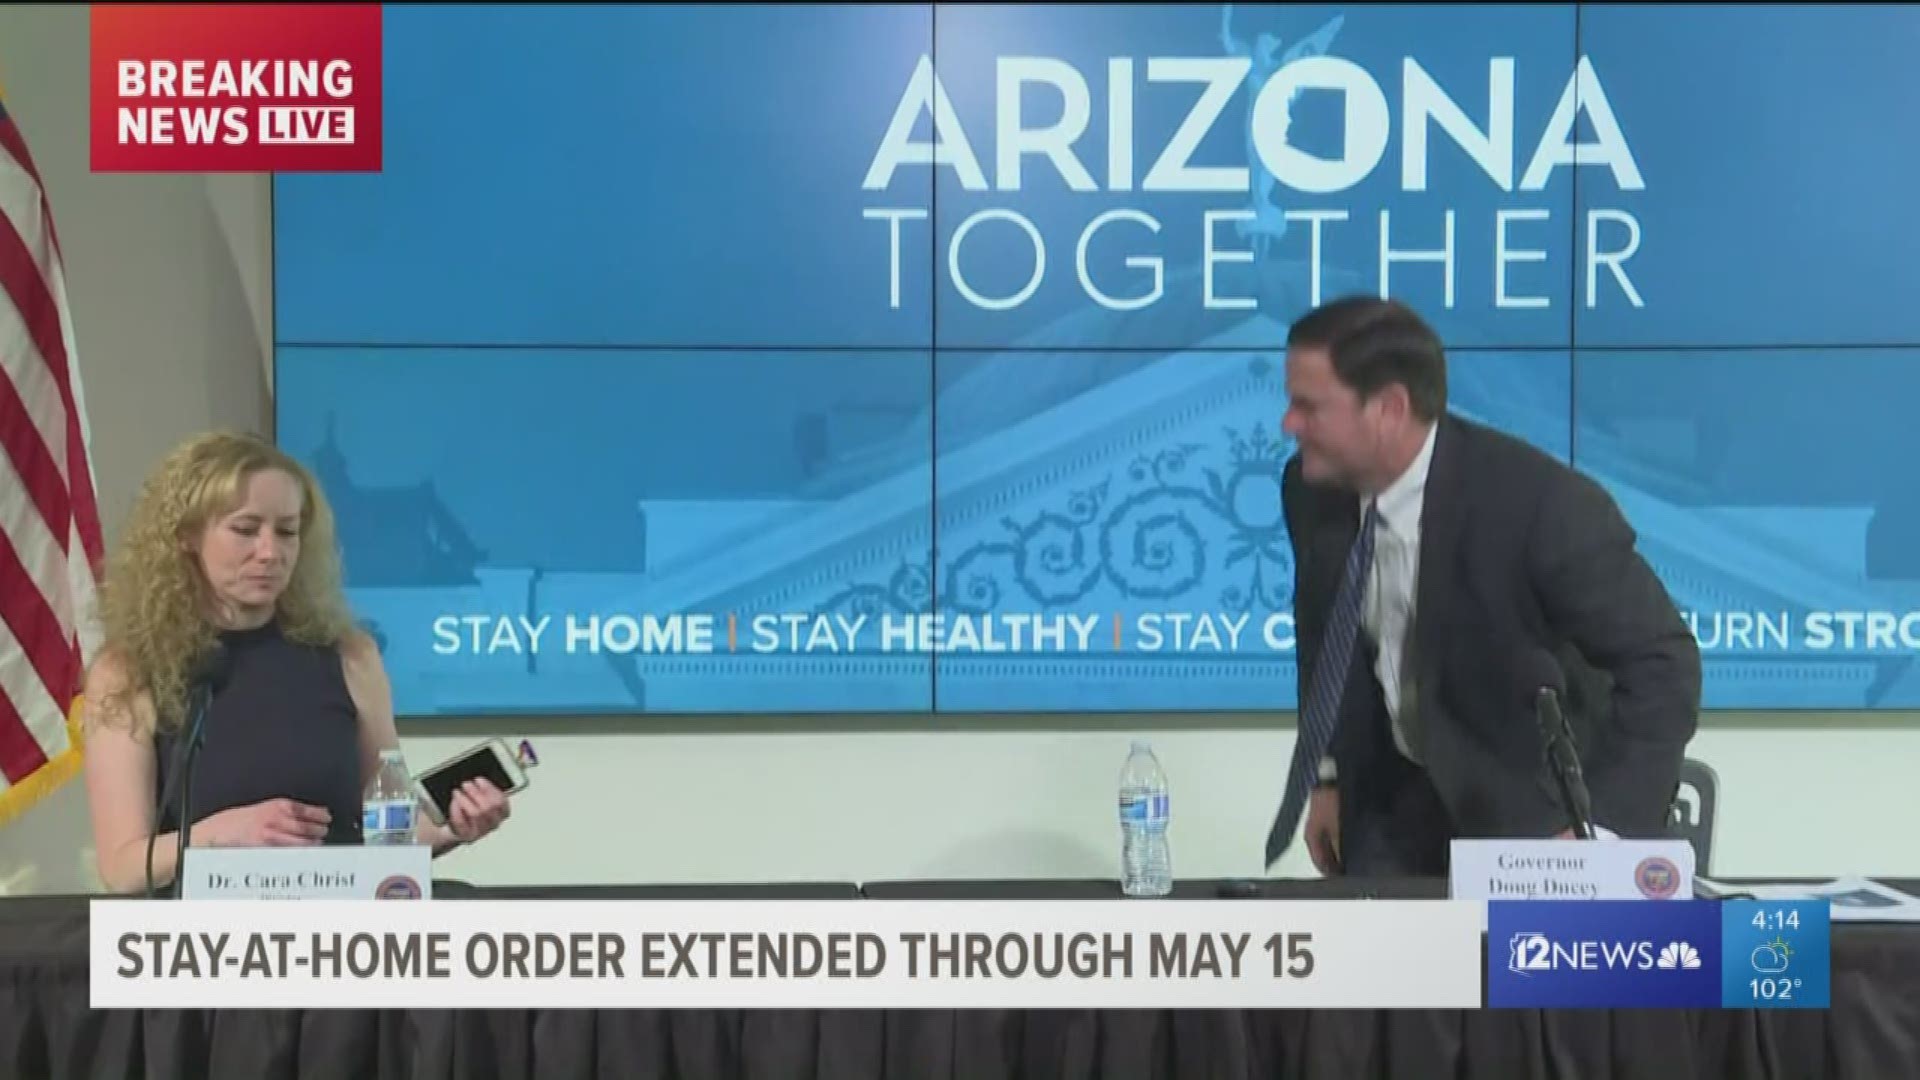 After a reporter pushed back on a question surrounding nursing homes, Gov. Ducey walked out of a press conference that extends Arizona's stay-at-home order.